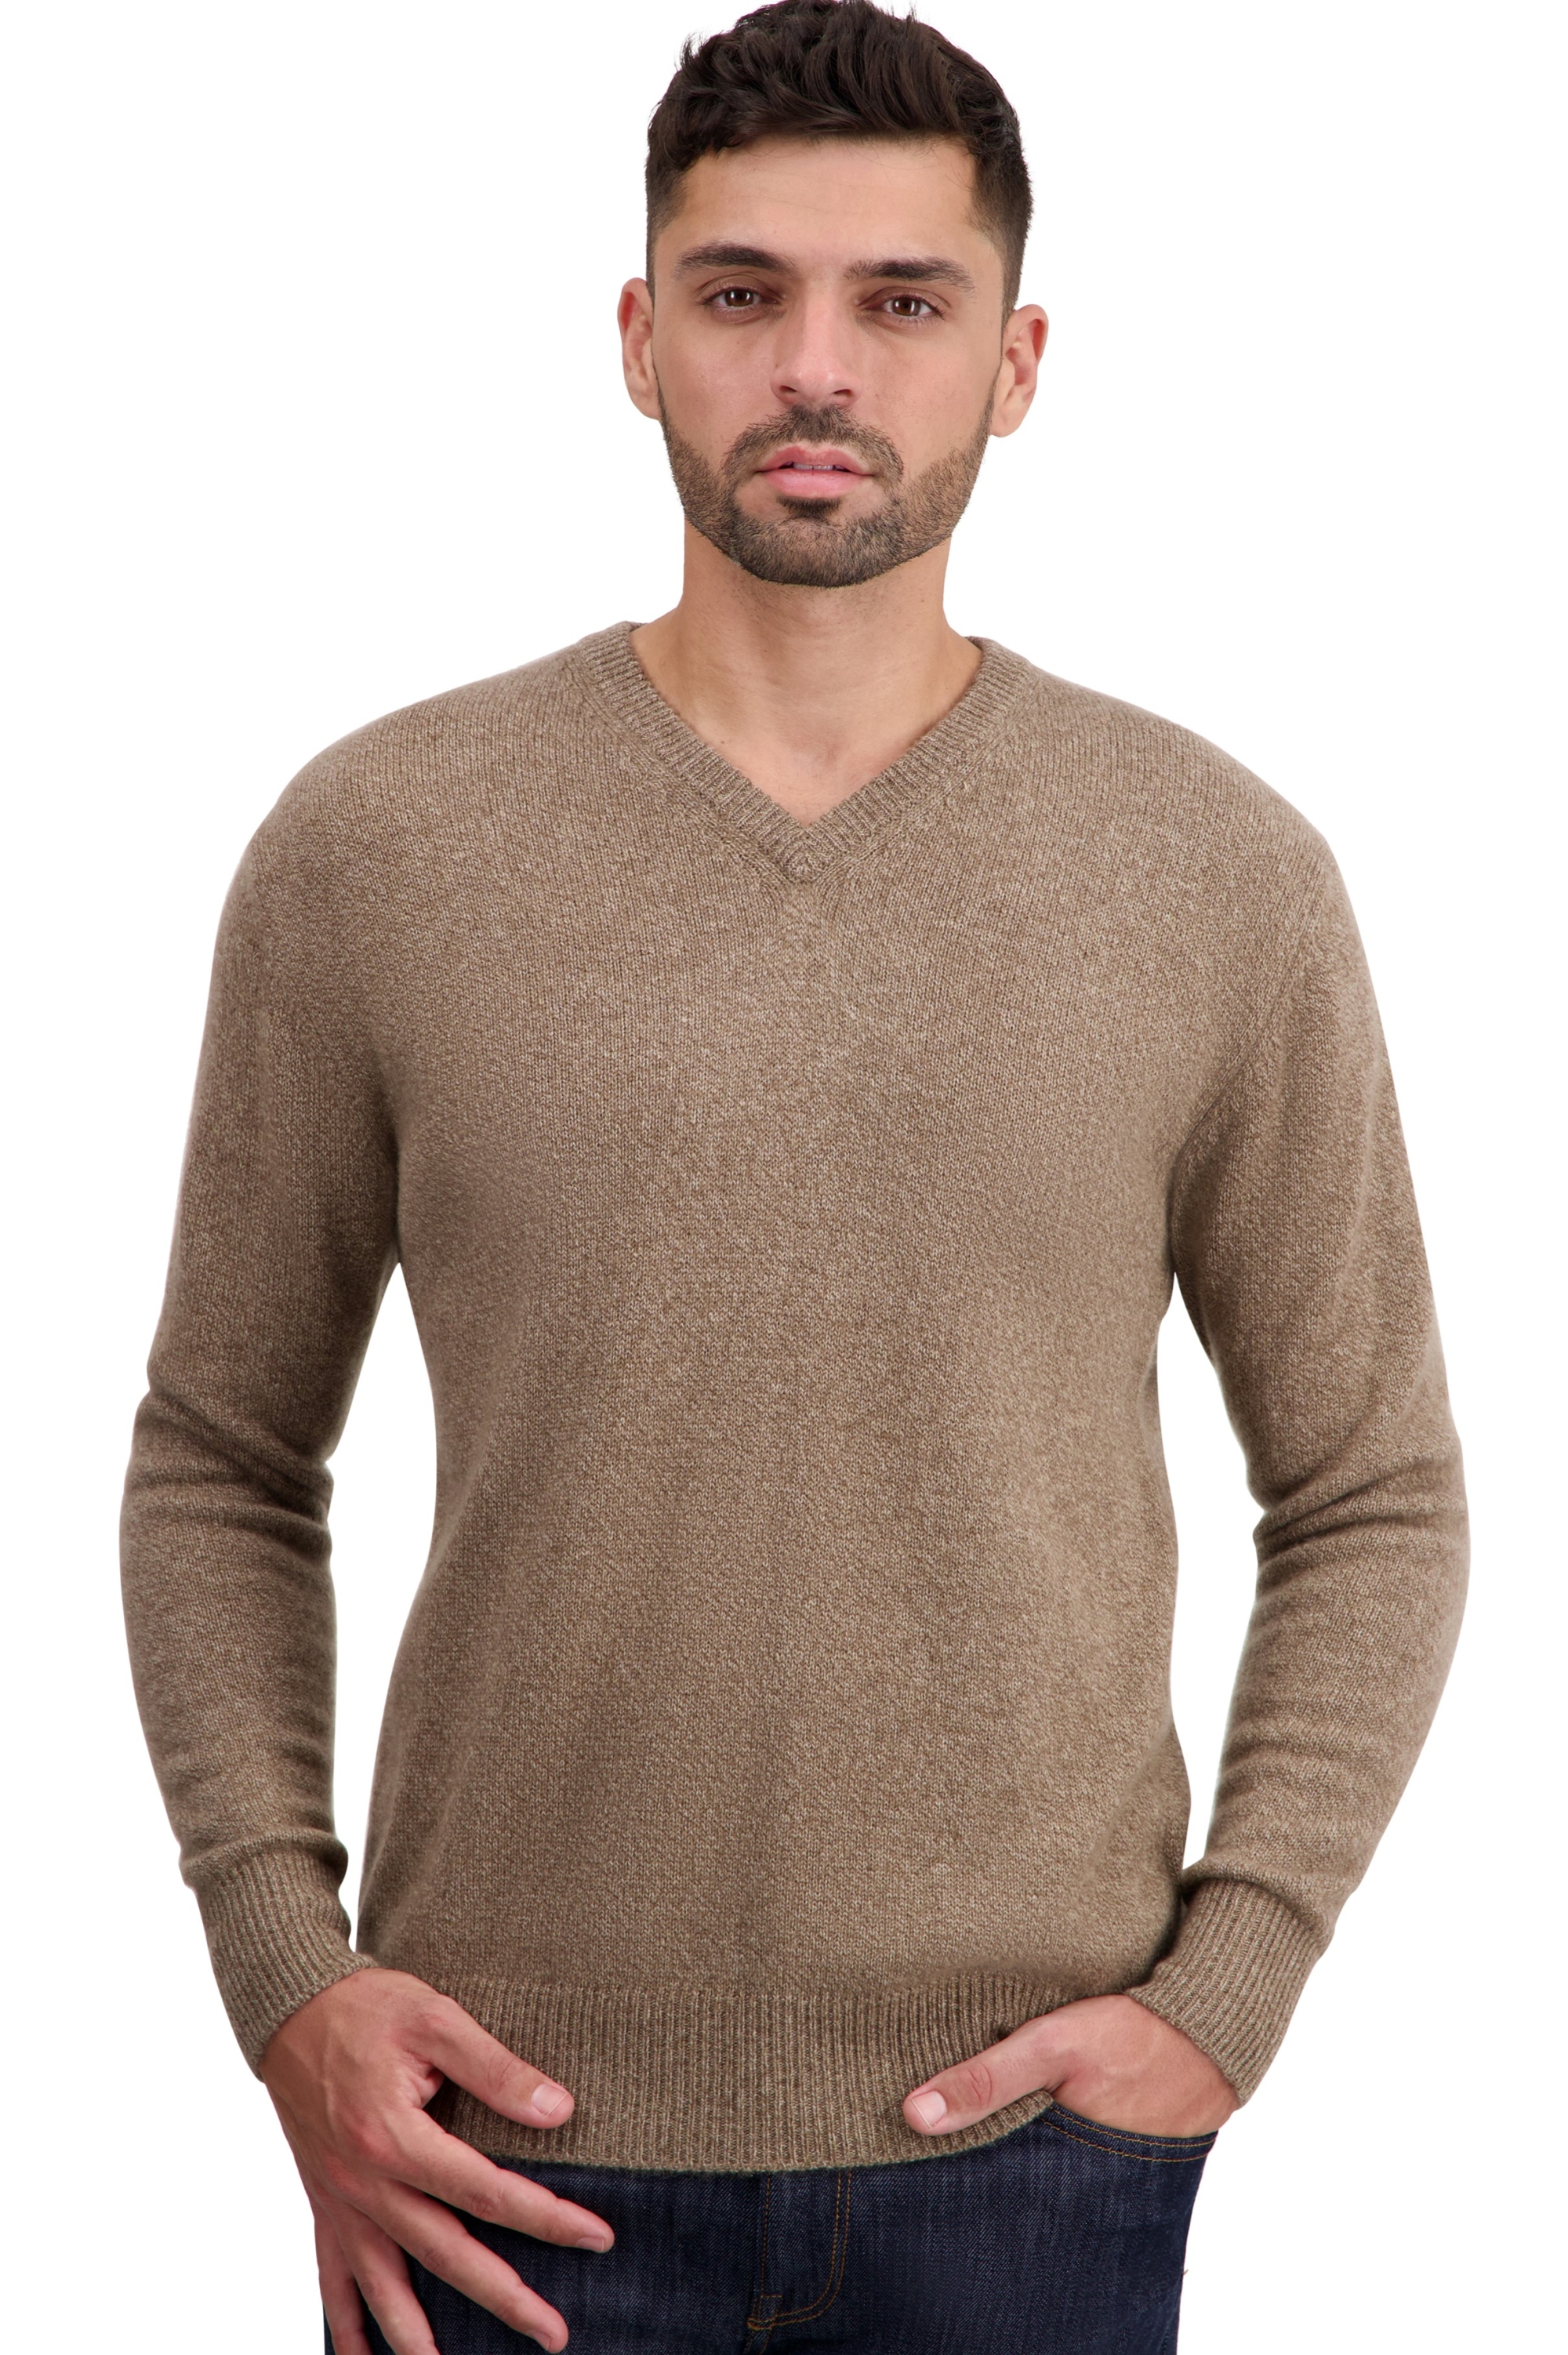 Cashmere men basic sweaters at low prices tour first tan marl 3xl